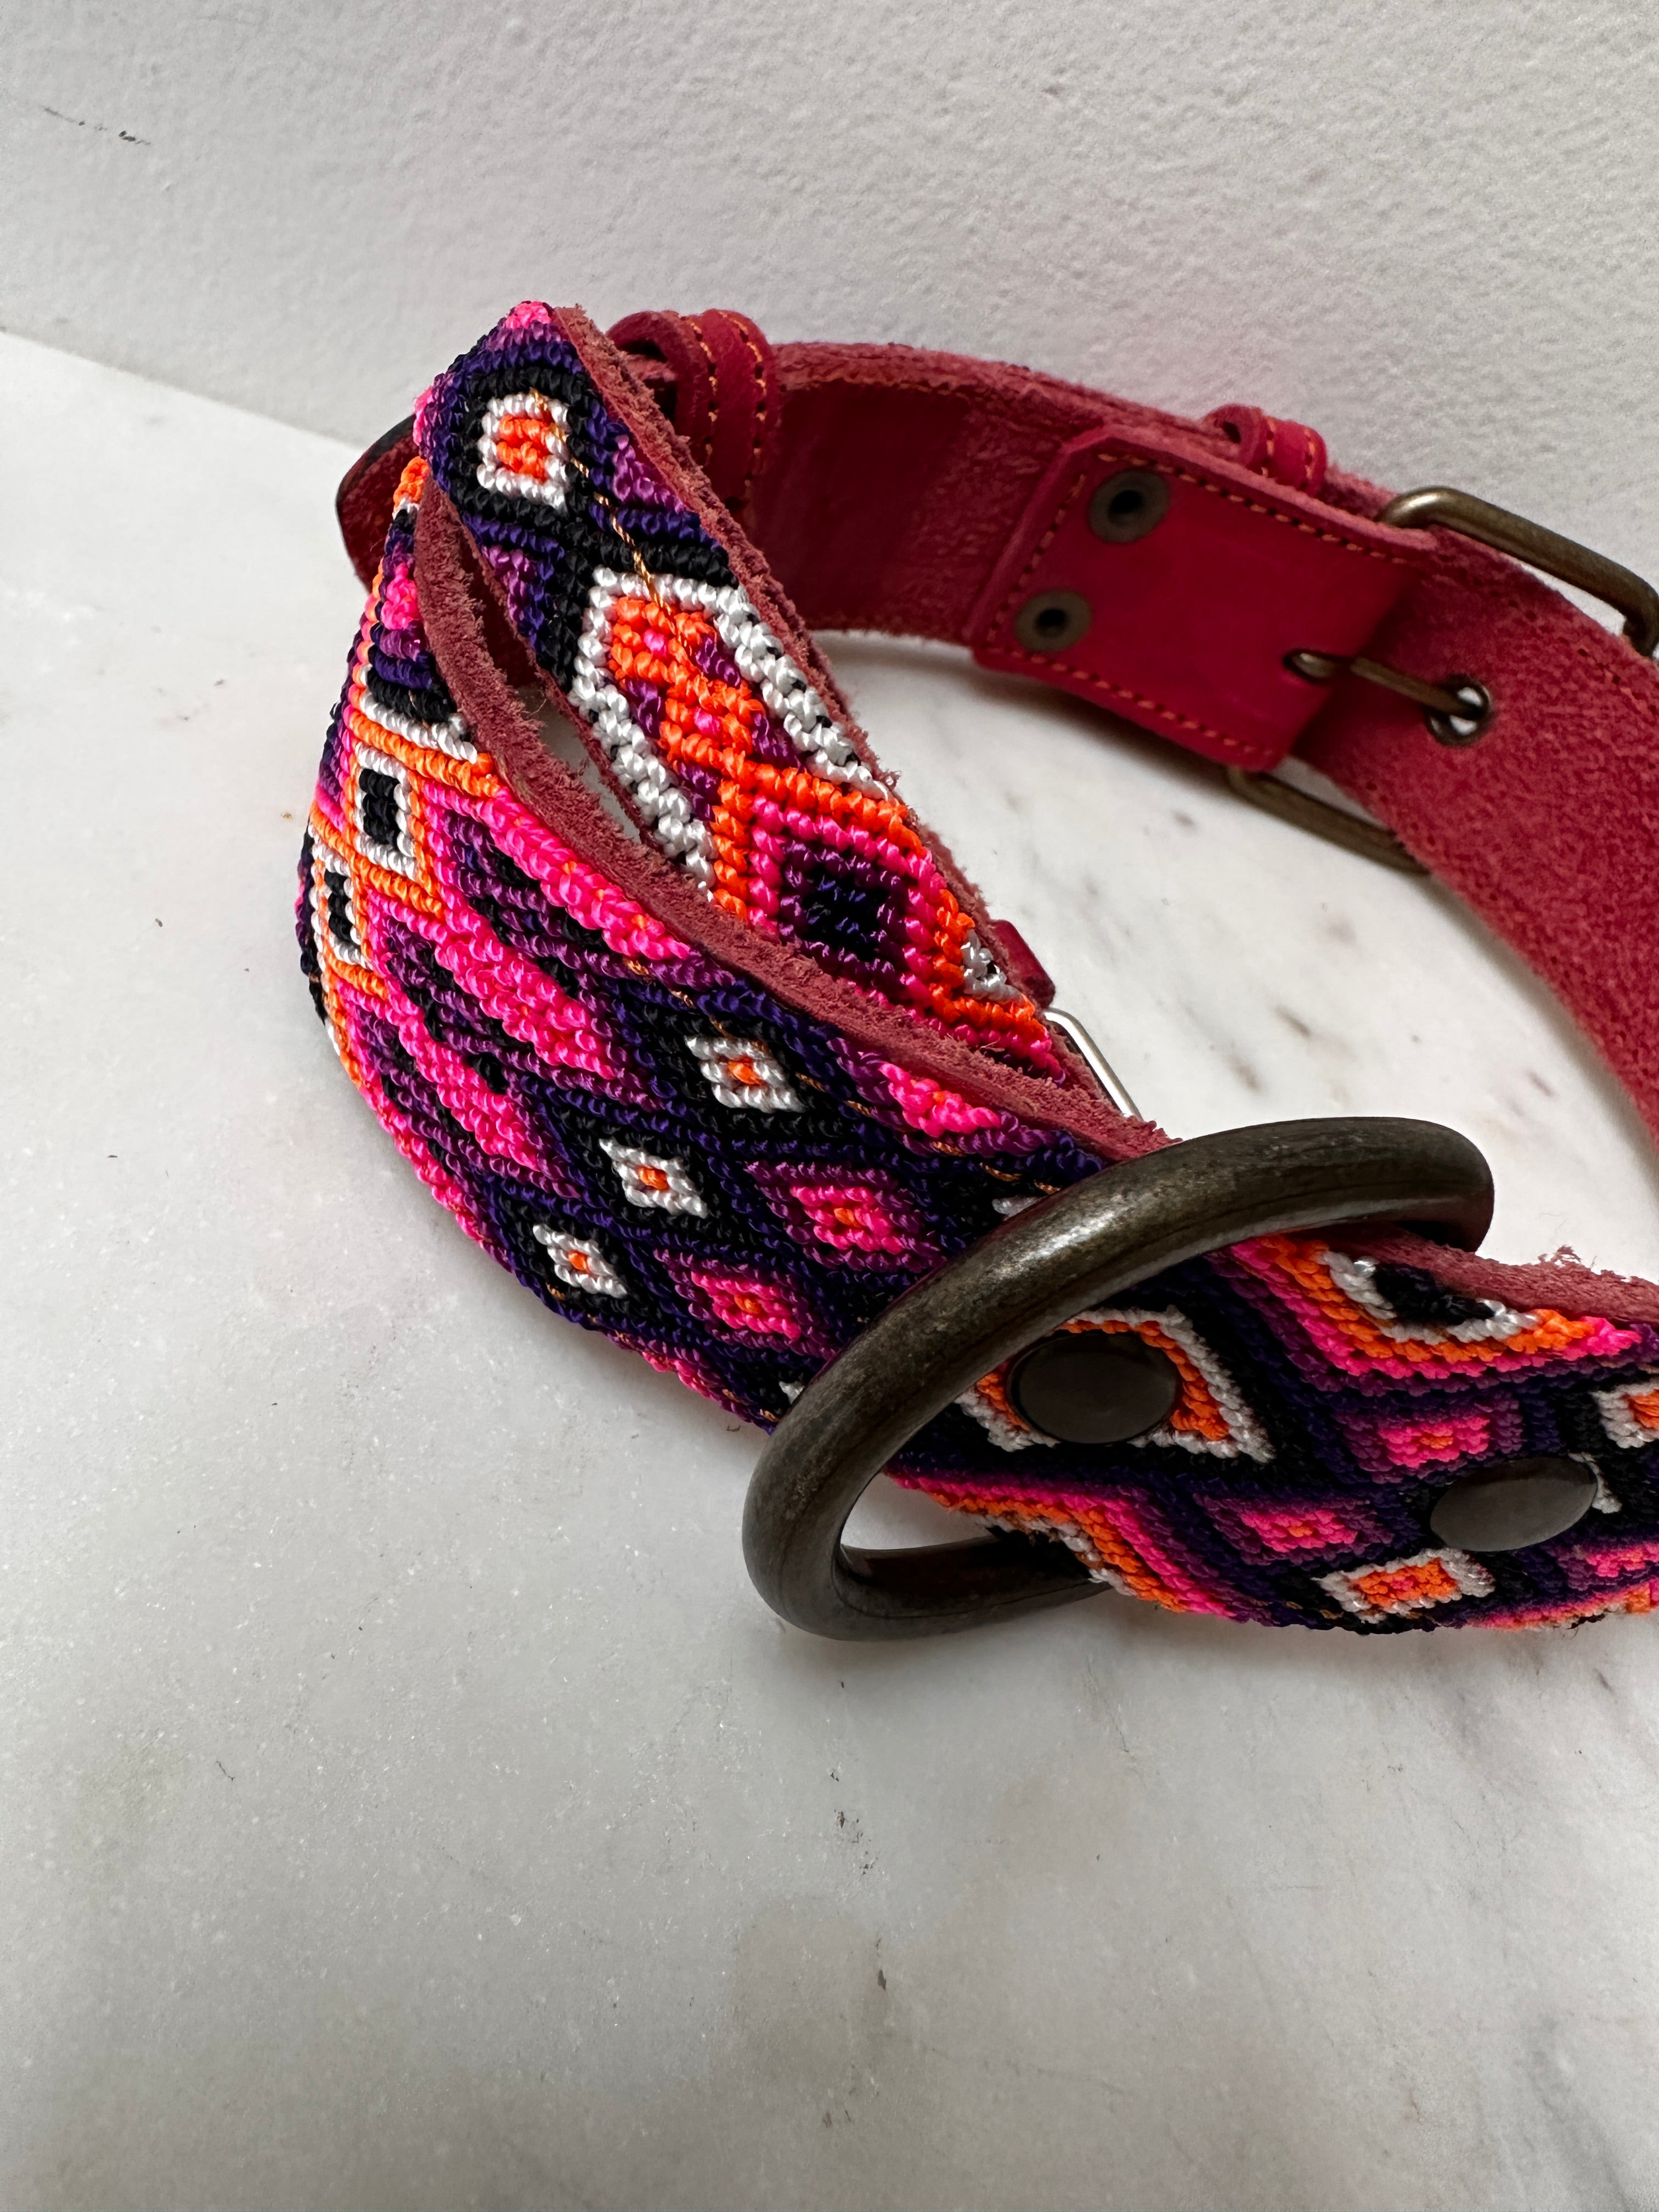 Future Nomads Homewares One Size Huichol Embroidered Wide Dog Collar L2